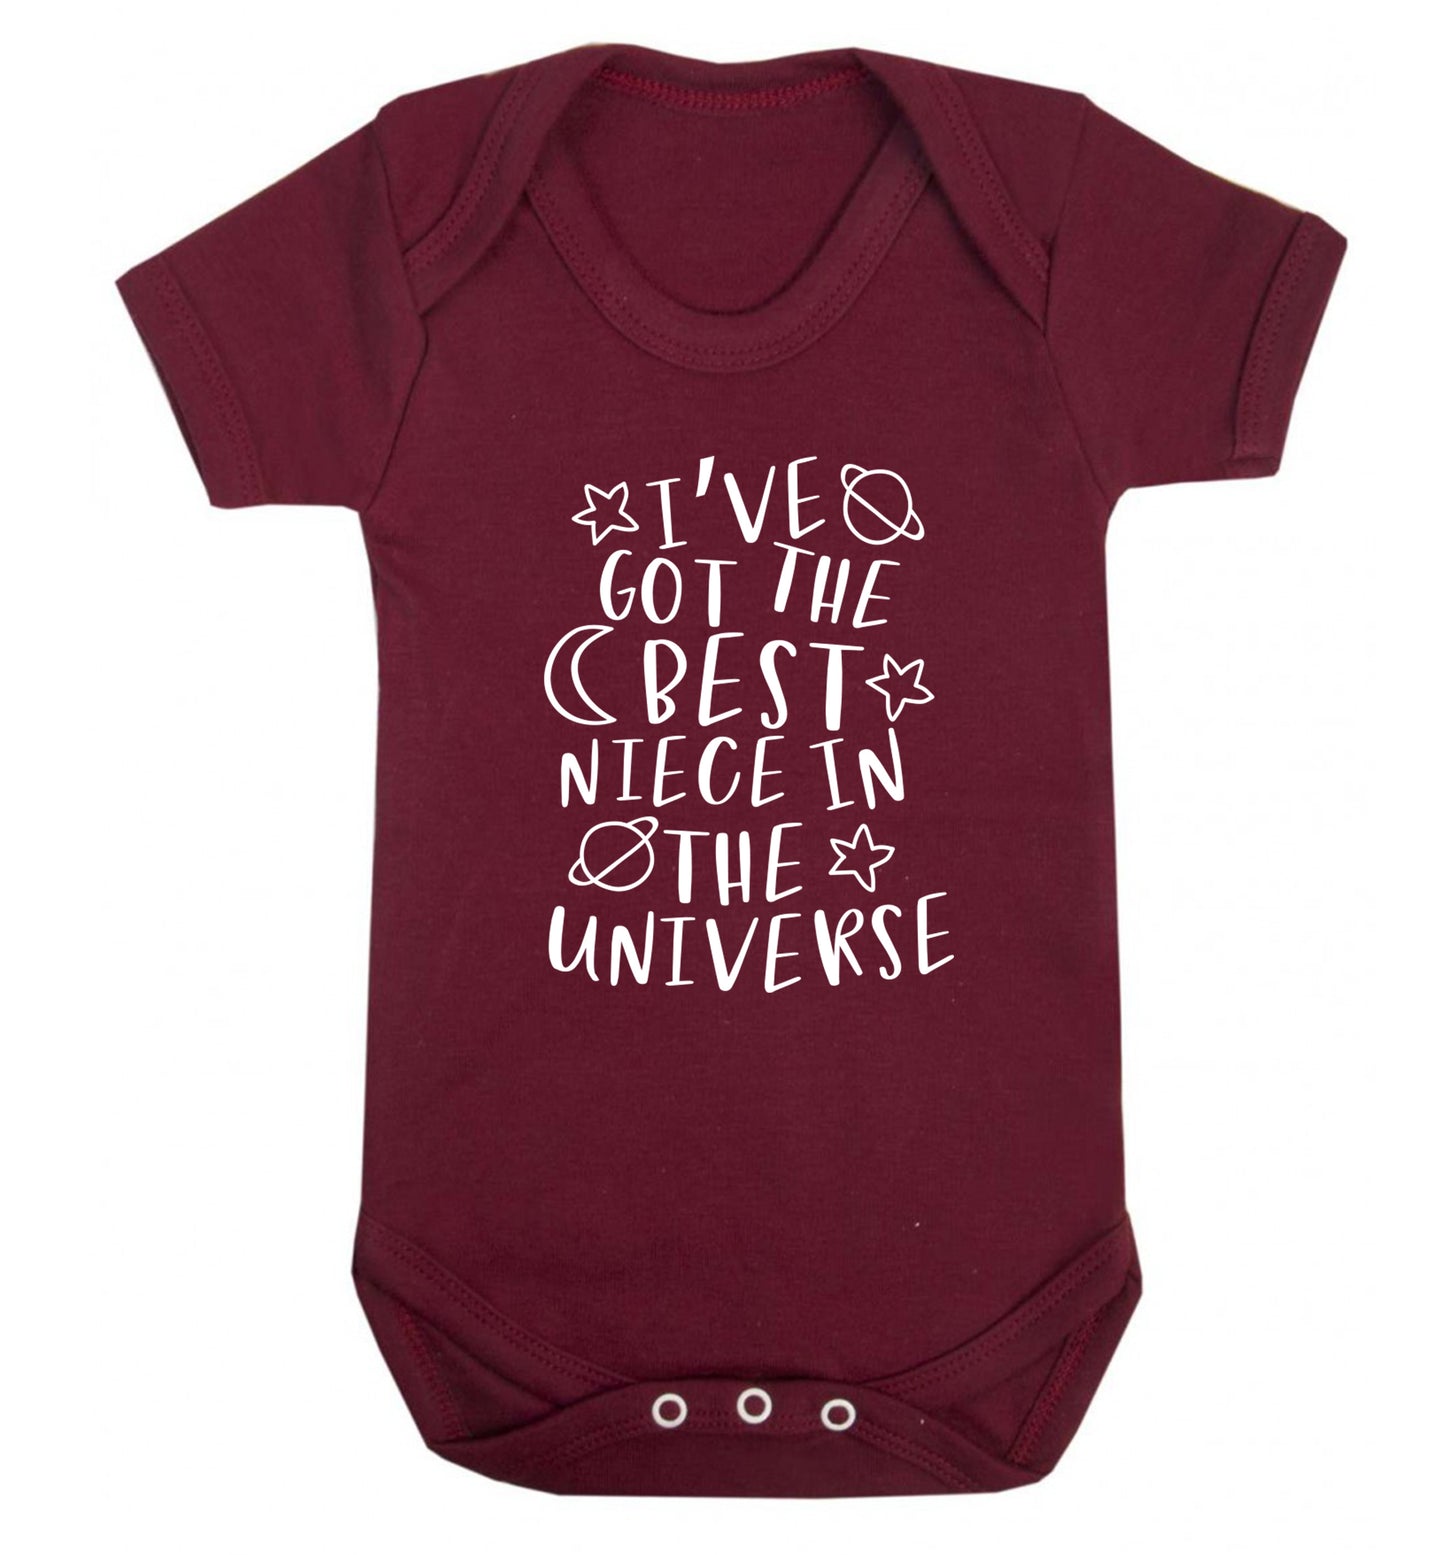 I've got the best niece in the universe Baby Vest maroon 18-24 months